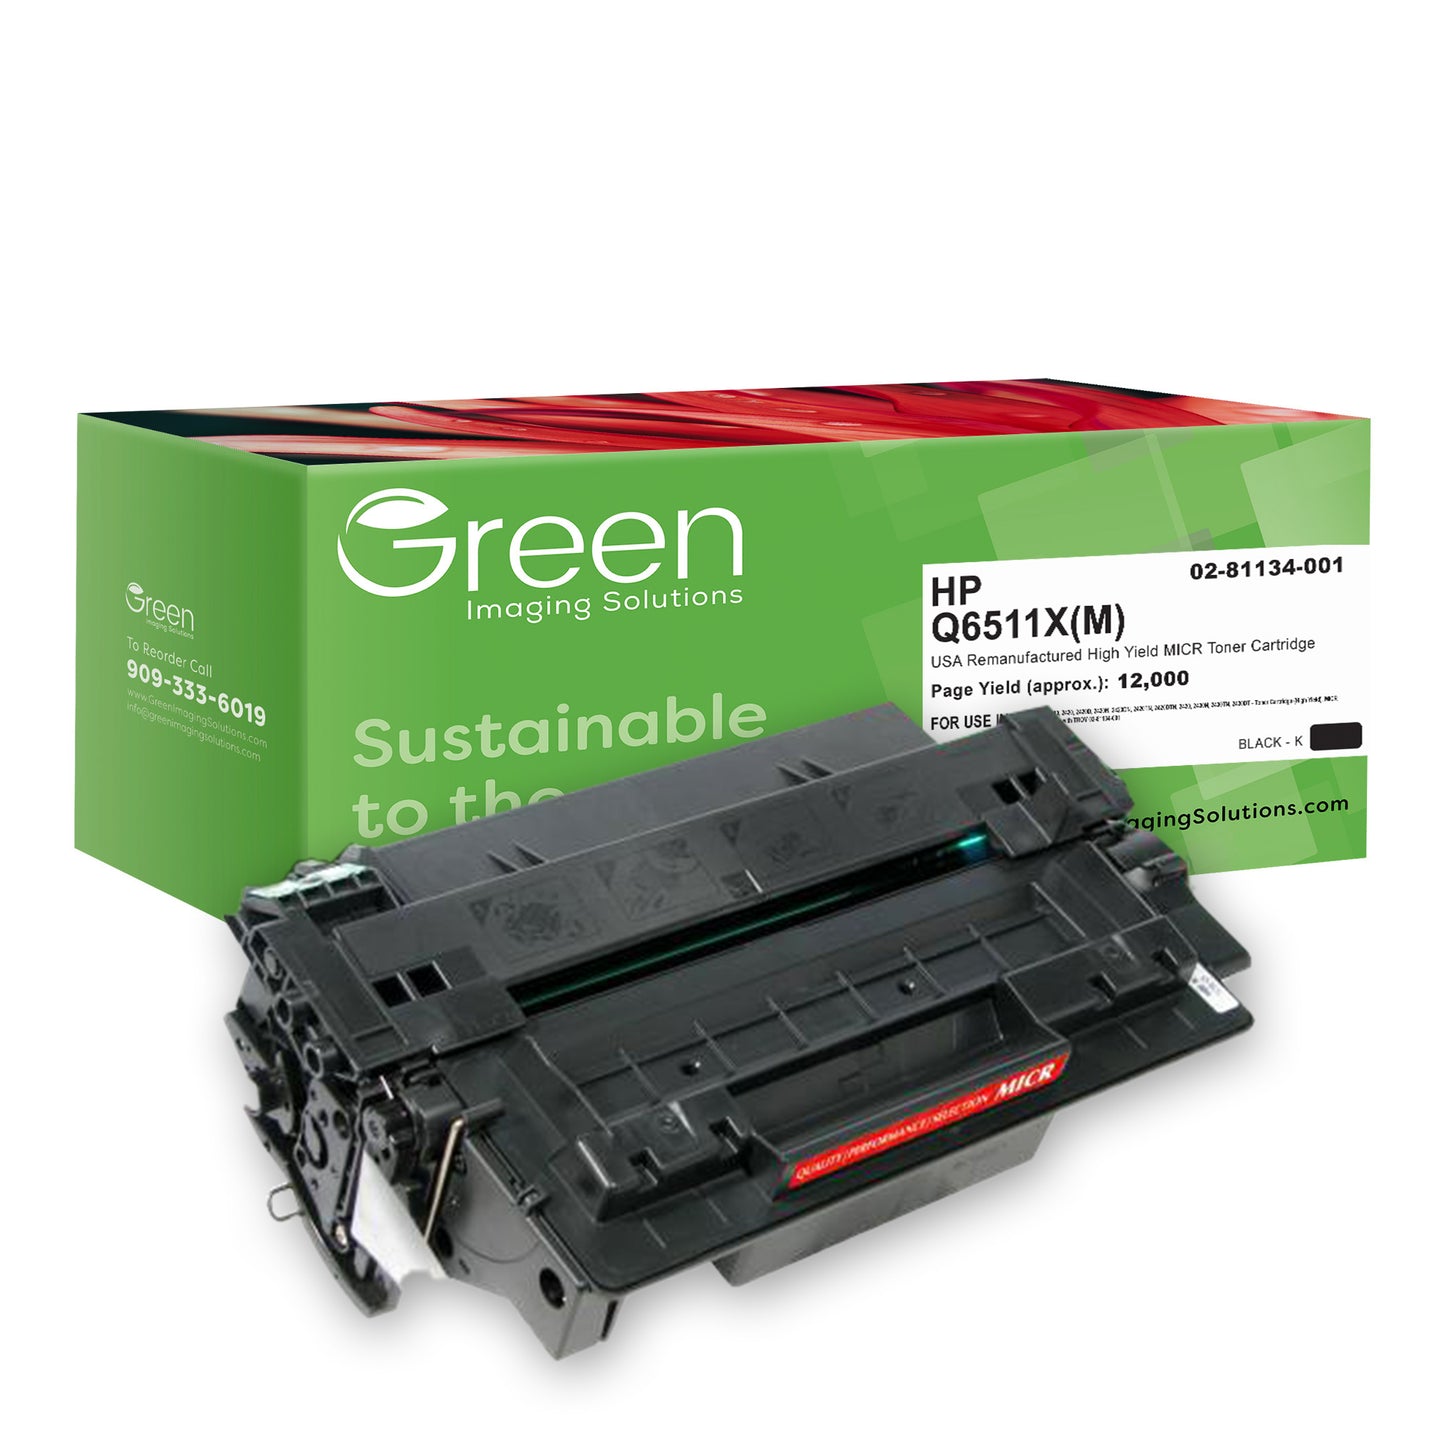 GIS USA Remanufactured High Yield MICR Toner Cartridge for HP Q6511X, TROY 02-81134-001